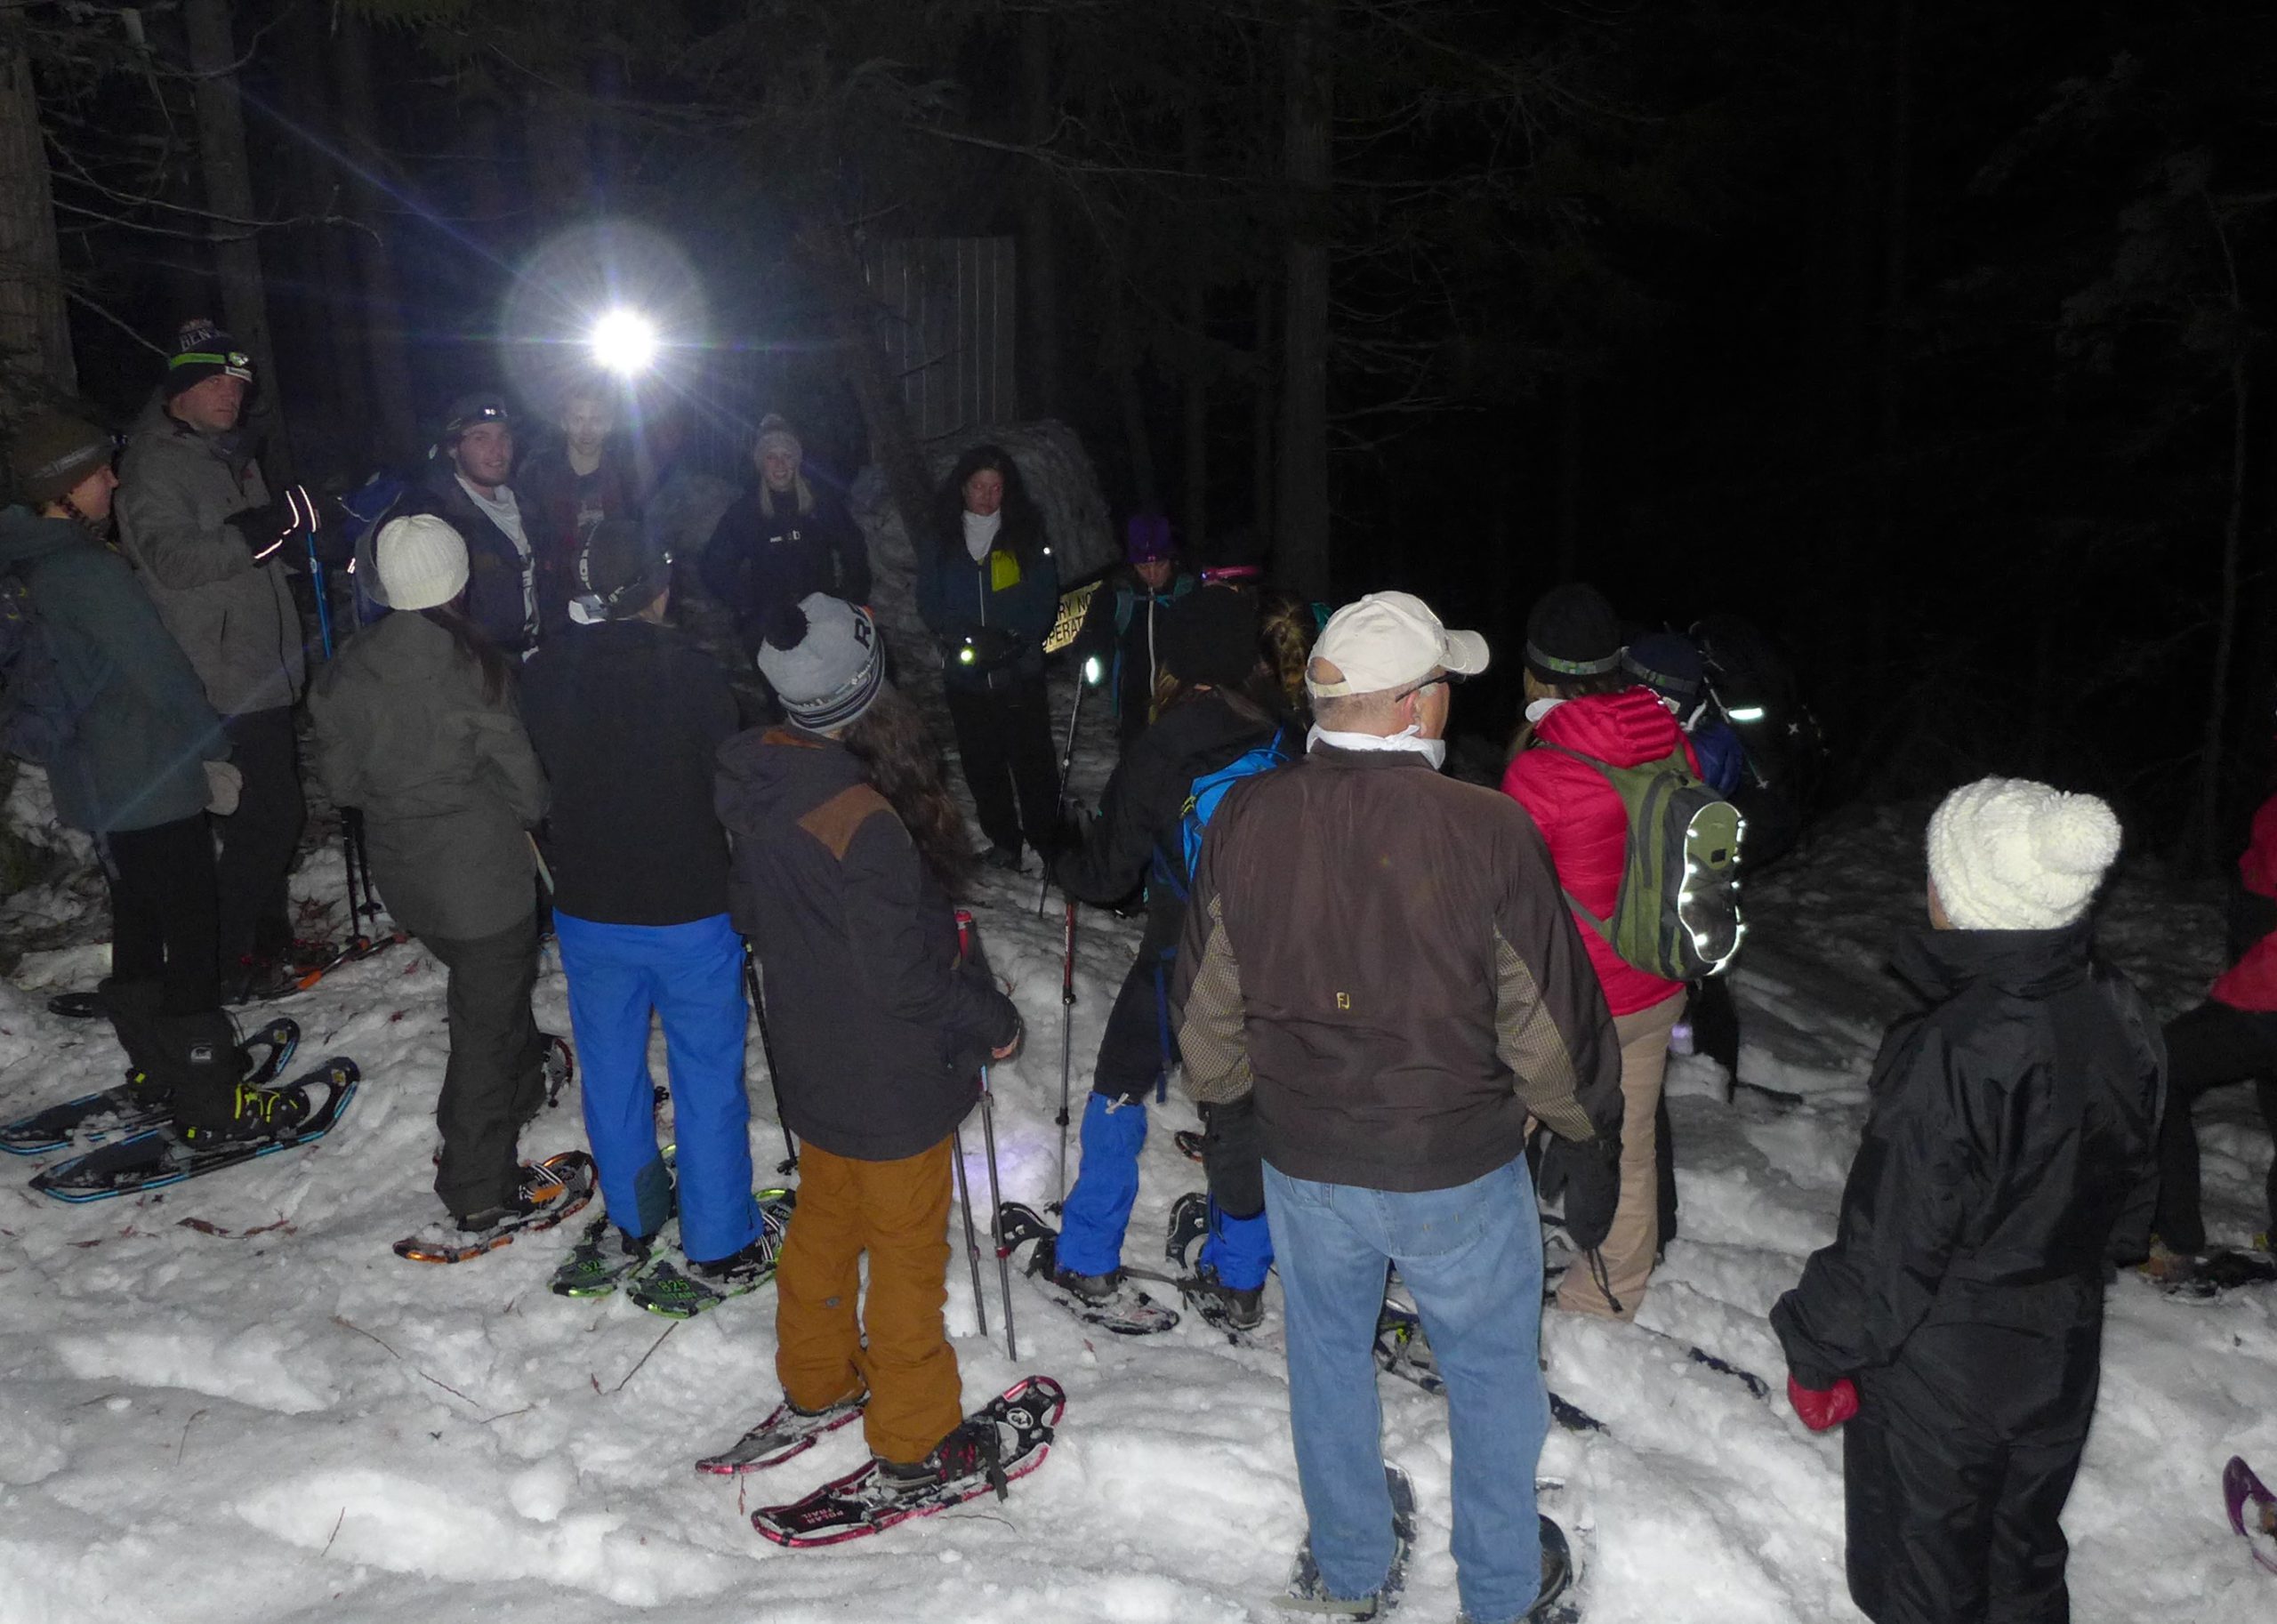 Third Annual Snowshoe and Fatbike Quest -- for the Take a Hike Foundation